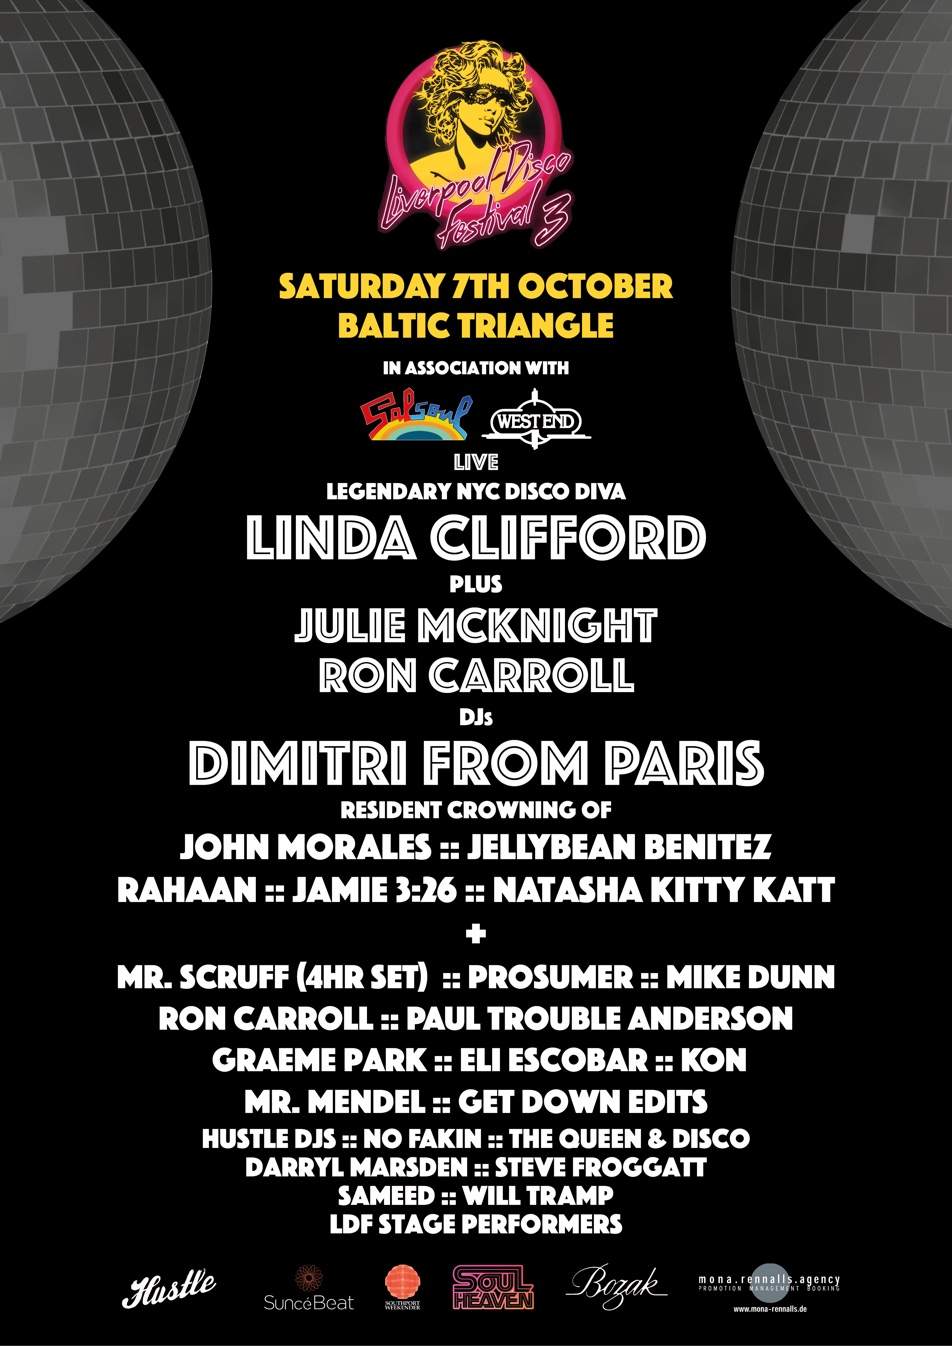 Liverpool Disco Festival bills Linda Clifford for its third edition image